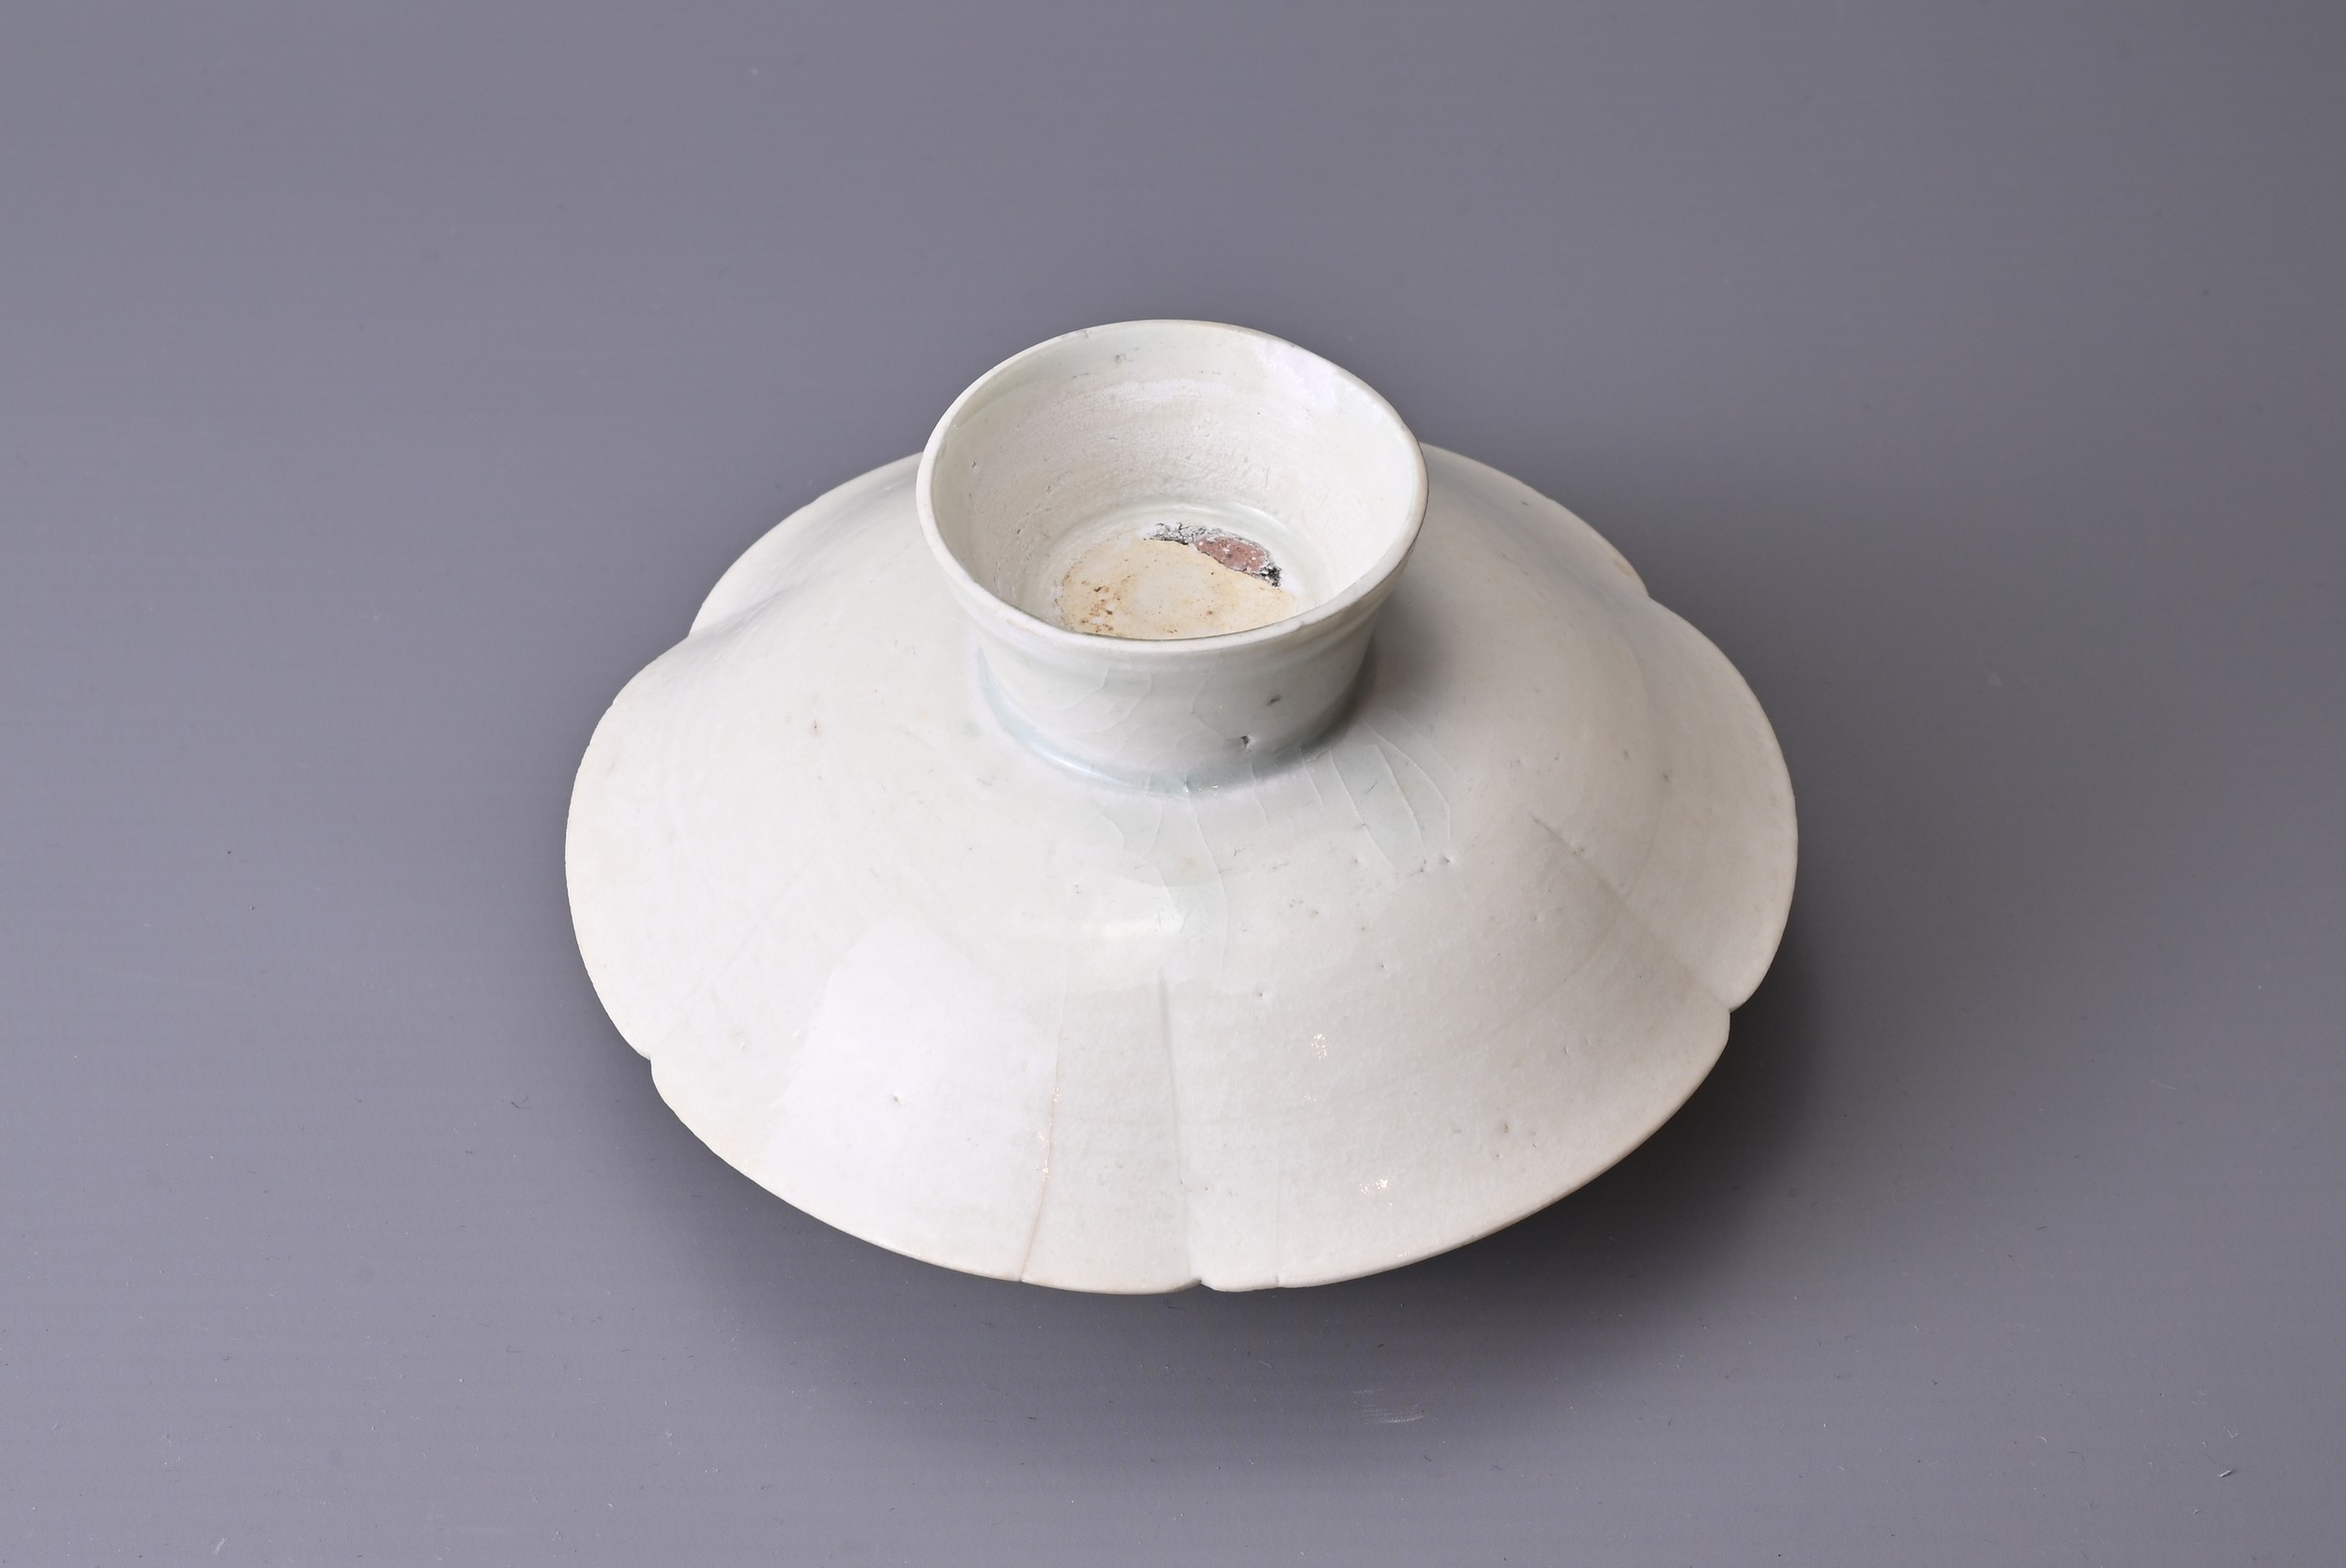 A CHINESE QINGBAI WARE CUP STAND, SONG DYNASTY (960-1279). A rounded cup top section attached to a - Image 4 of 6